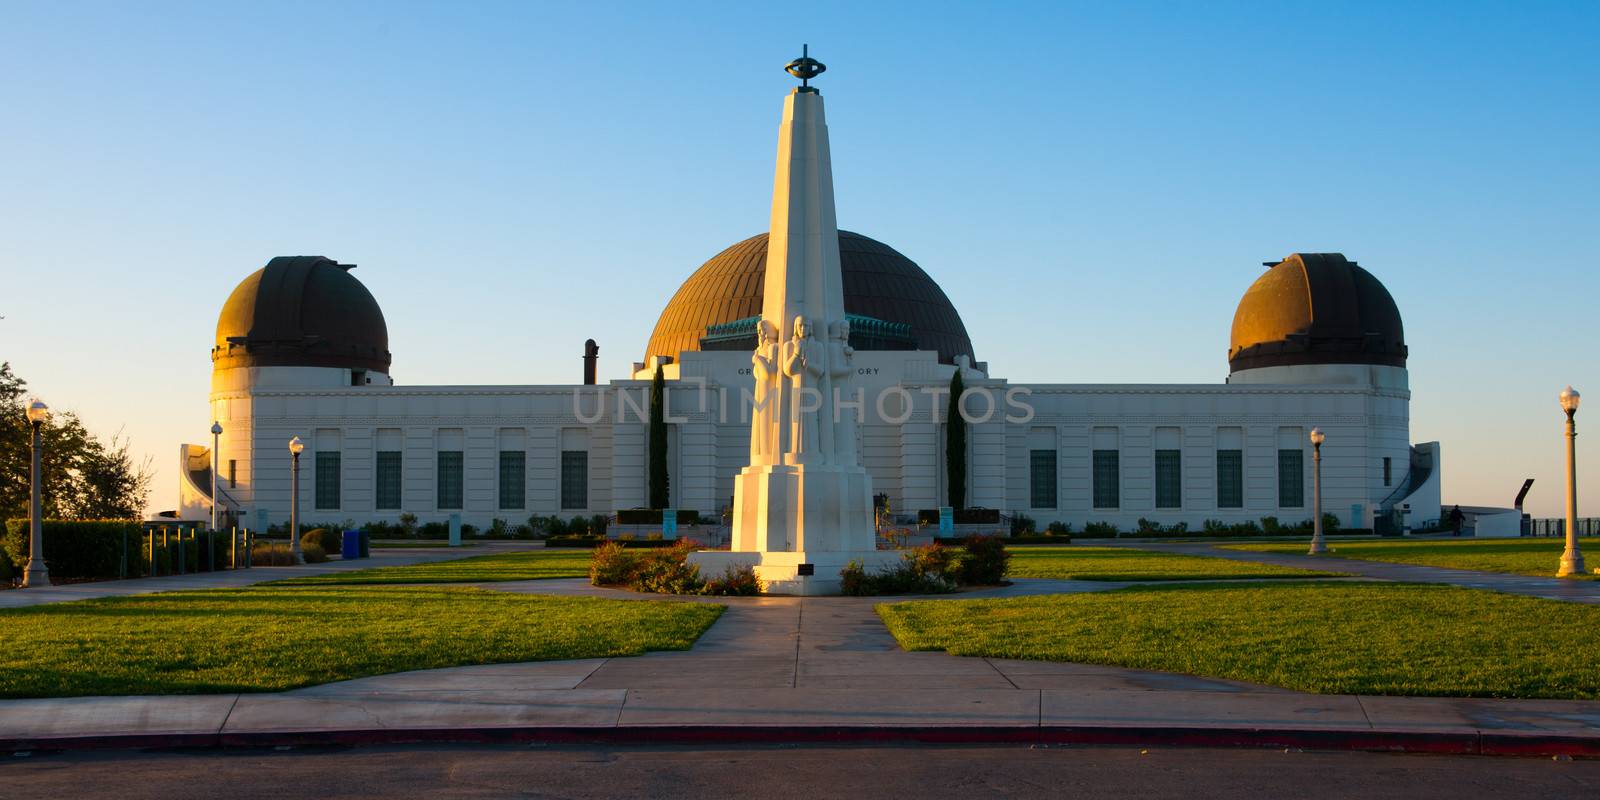 Astronomers Monument in front of Griffith Observatory in Griffith Park, Los Angeles, California, USA